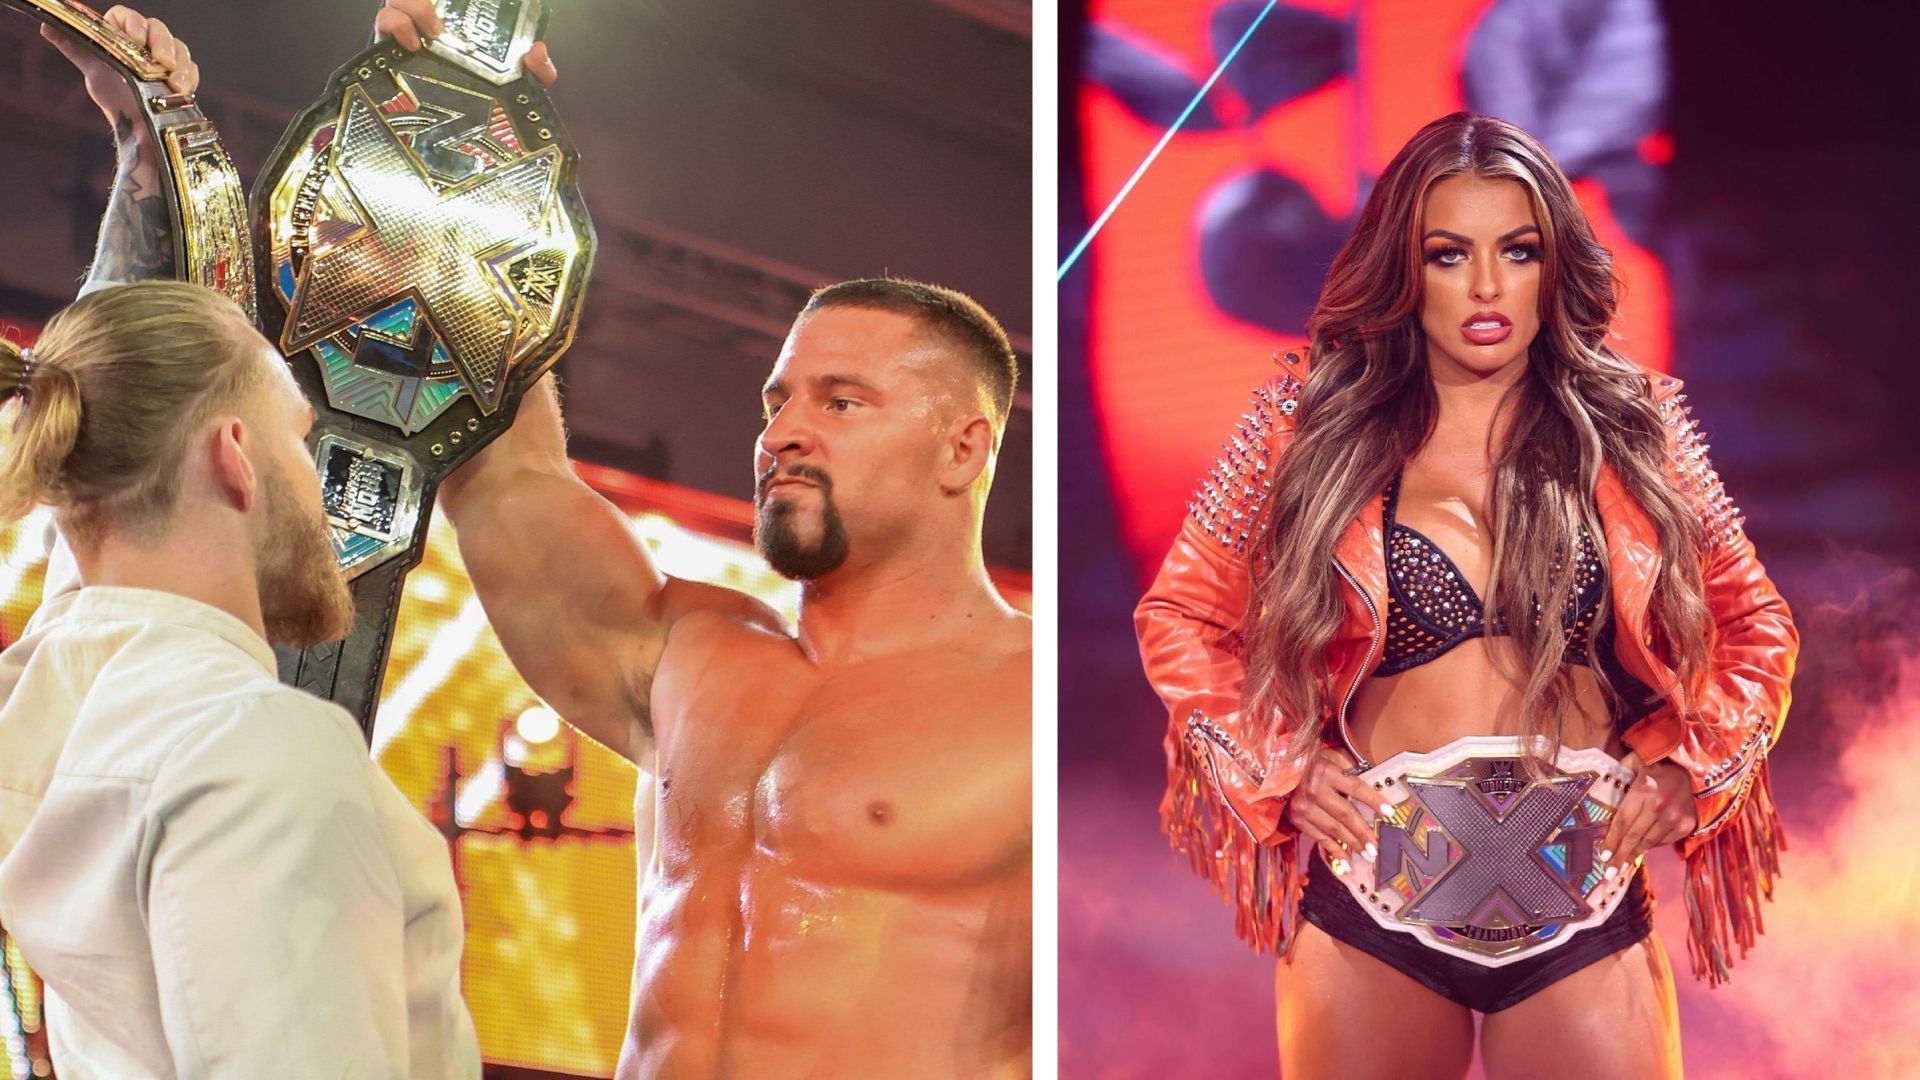 Stars from WWE NXT and NXT UK could potentially square off in a Worlds Collide event